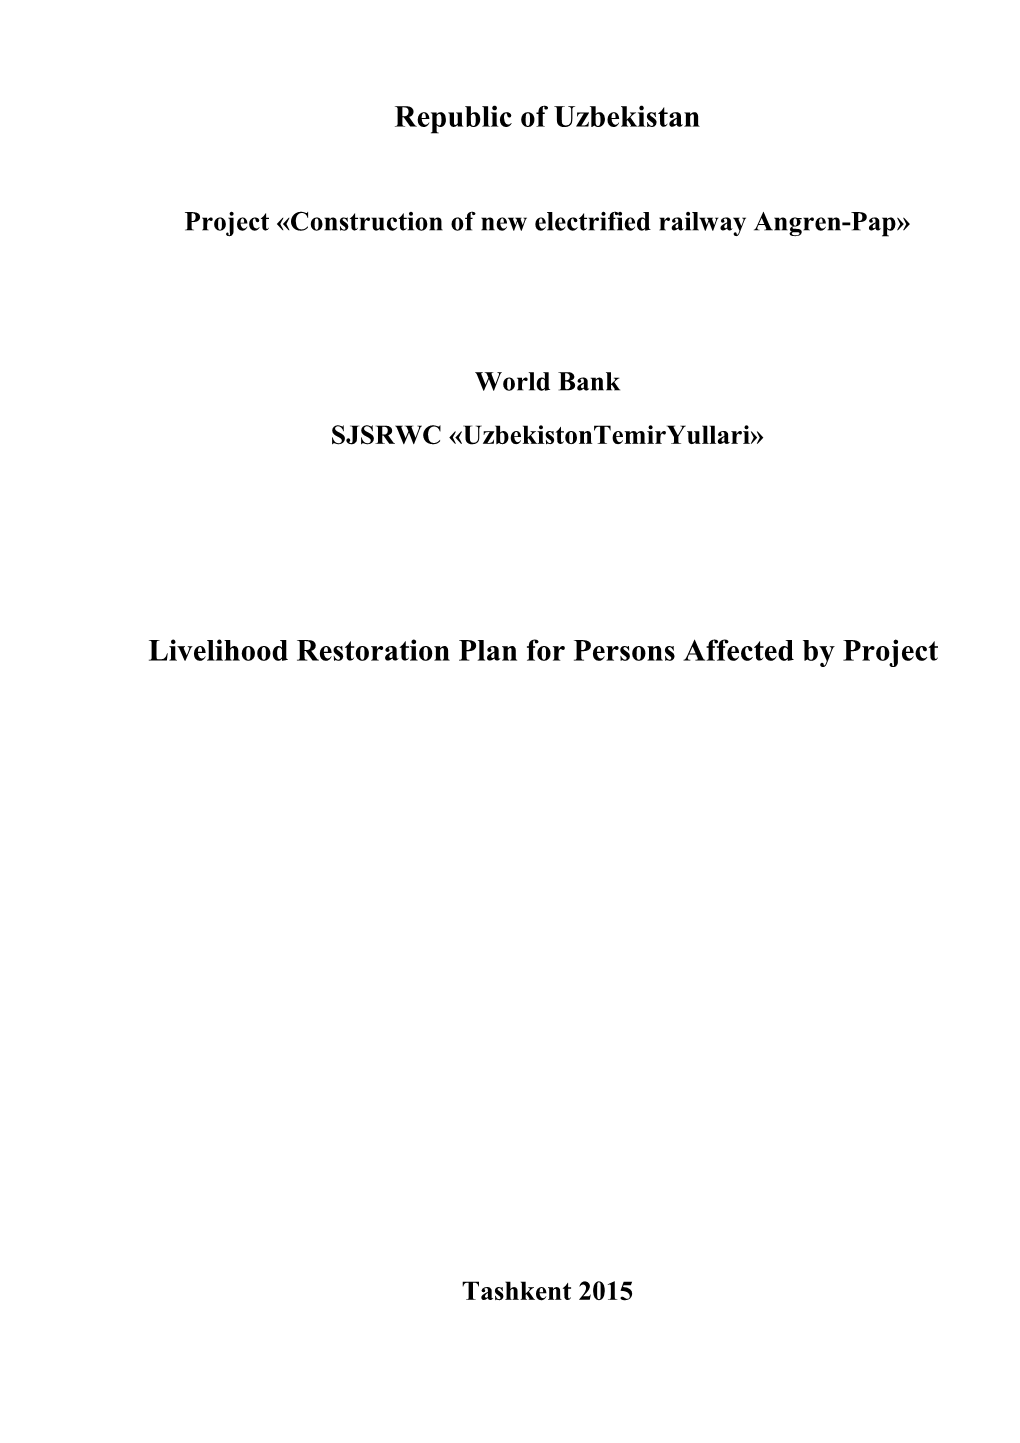 Project Construction of New Electrified Railway Angren-Pap